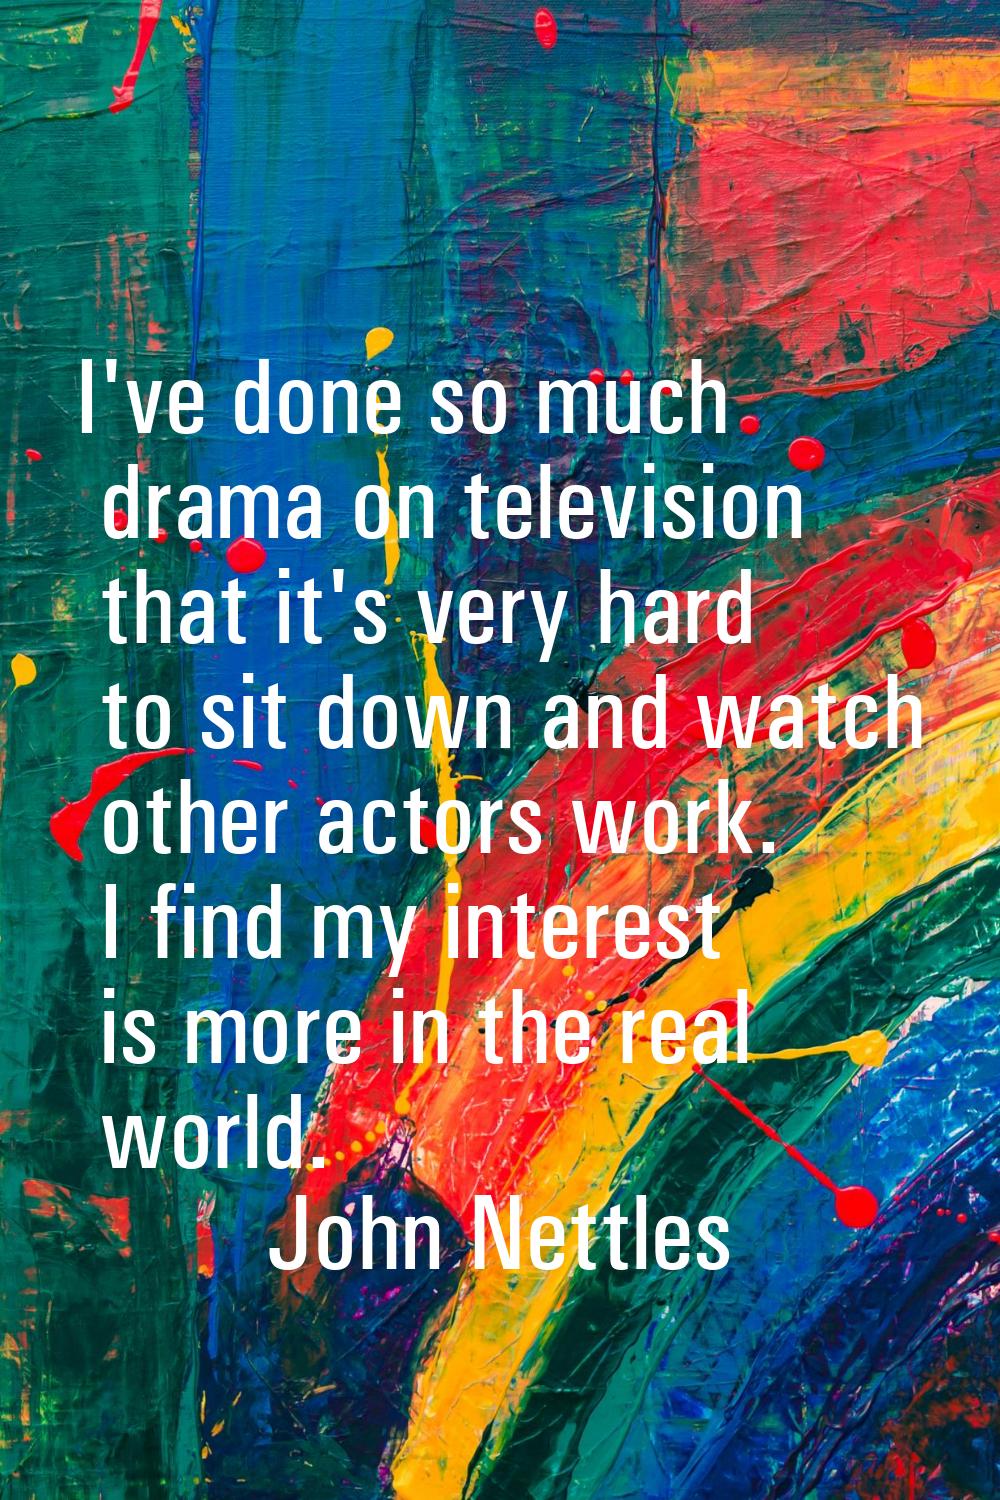 I've done so much drama on television that it's very hard to sit down and watch other actors work. 